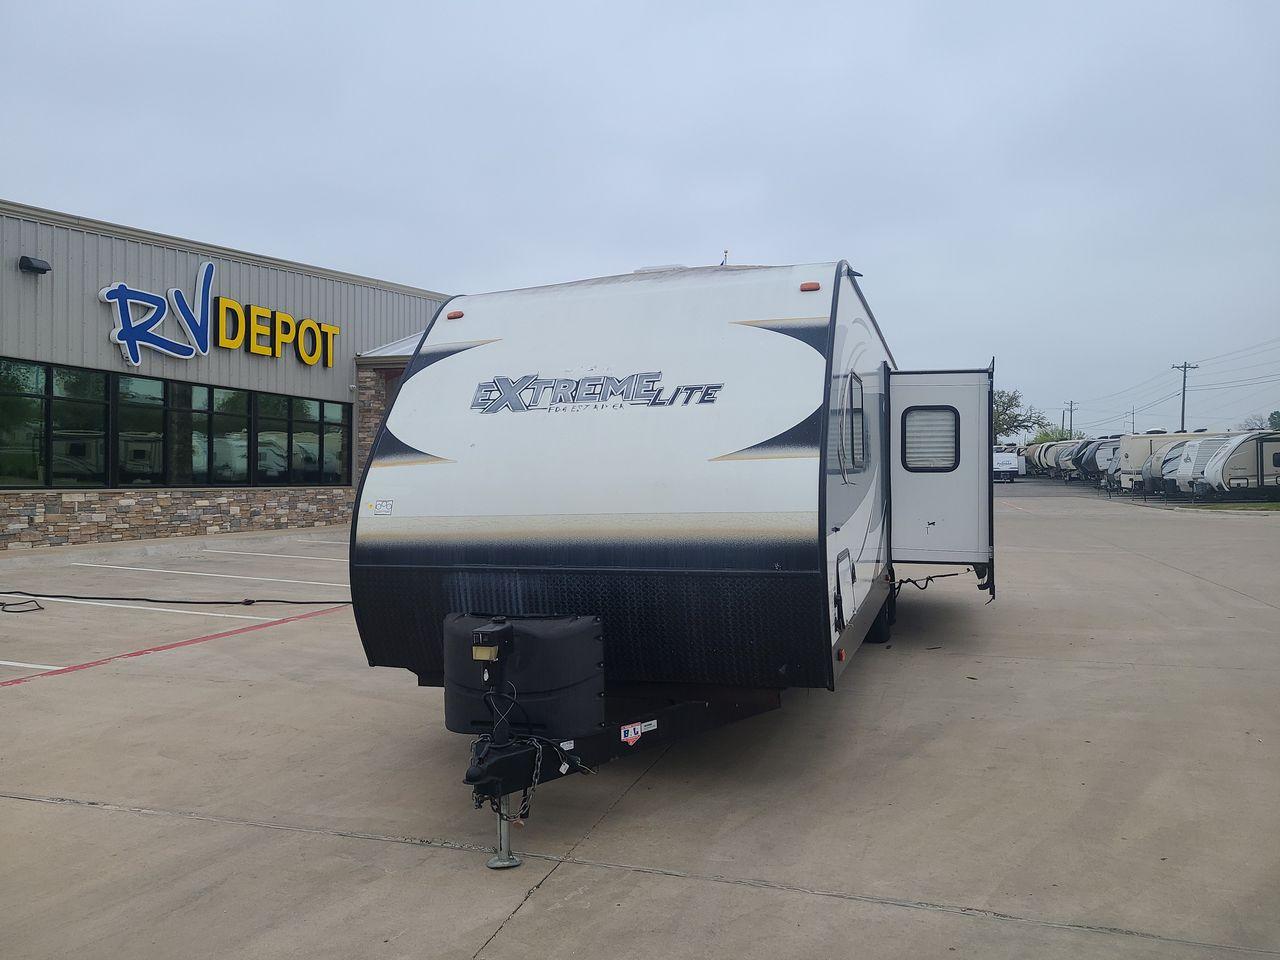 2017 WHITE FOREST RIVER VIBE 277RLS (4X4TVBD28H4) , Length: 34.58 ft. | Dry Weight: 5,945 lbs. | Slides: 1 transmission, located at 4319 N Main St, Cleburne, TX, 76033, (817) 678-5133, 32.385960, -97.391212 - Enjoy taking trips in this Vibe Extreme Lite travel trailer style with your loved ones. One wide slide, two entry/exit doors, a rear living plan, and much more are included in the Model 277RLS! The dimensions of this unit are 34.58 ft in length, 8 ft in width, and 11 ft in height. It has a dry we - Photo #0